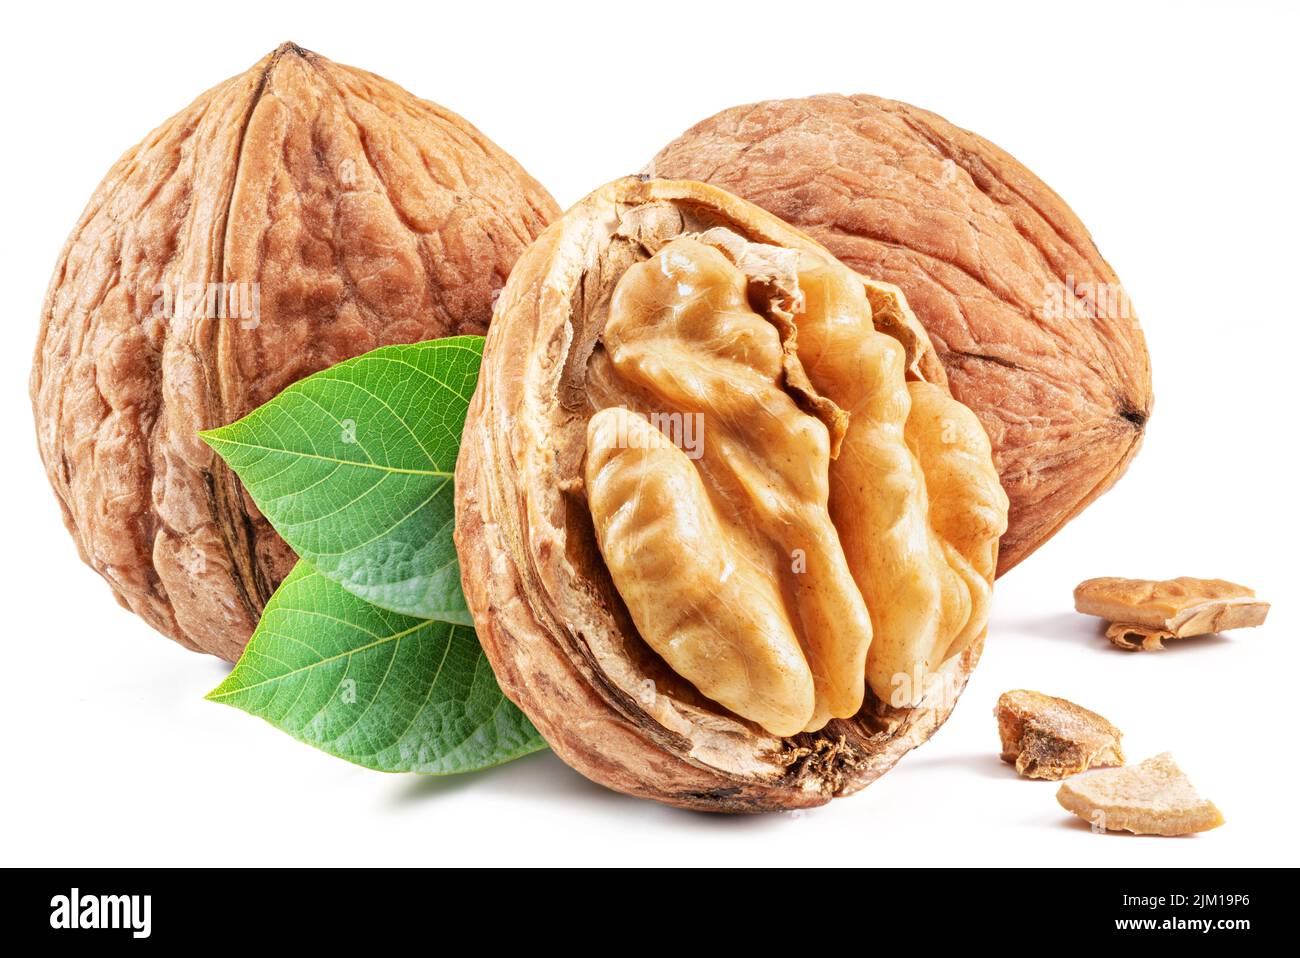 Walnuts, walnut kernel and green leaves isolated on white background. Stock Photo